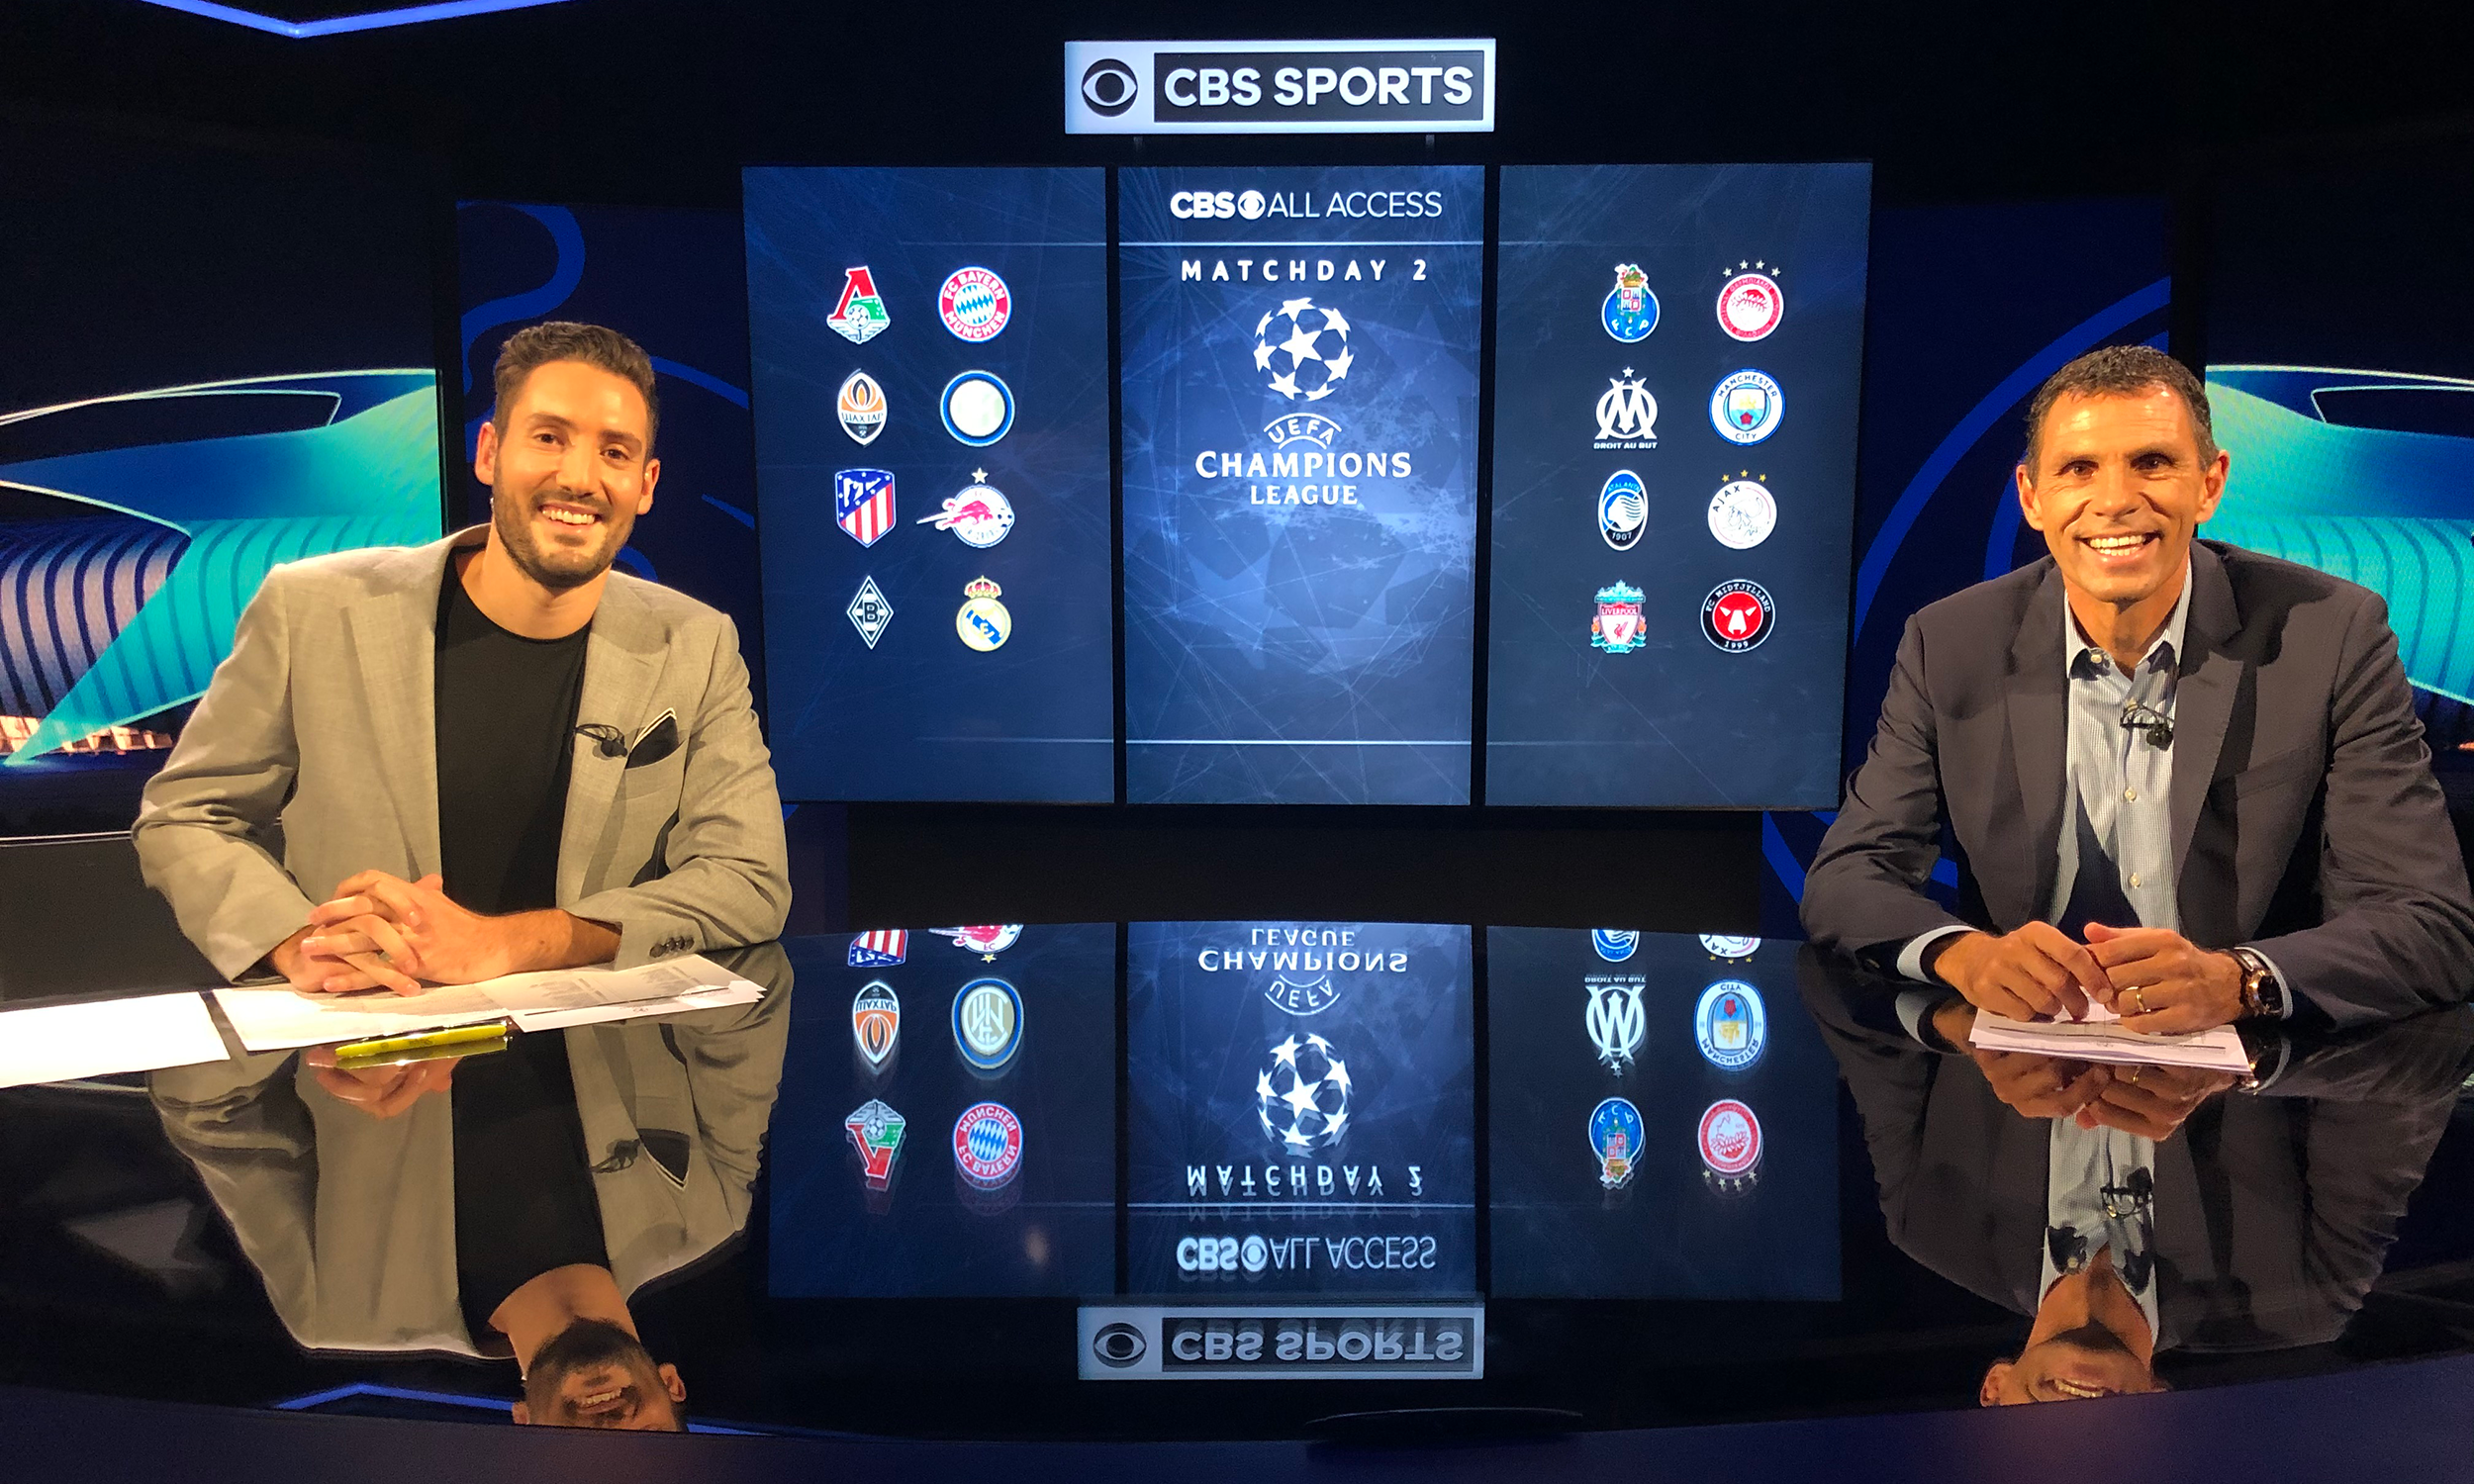 UEFA Champions League Final: CBS Sports Will Be Closer to the